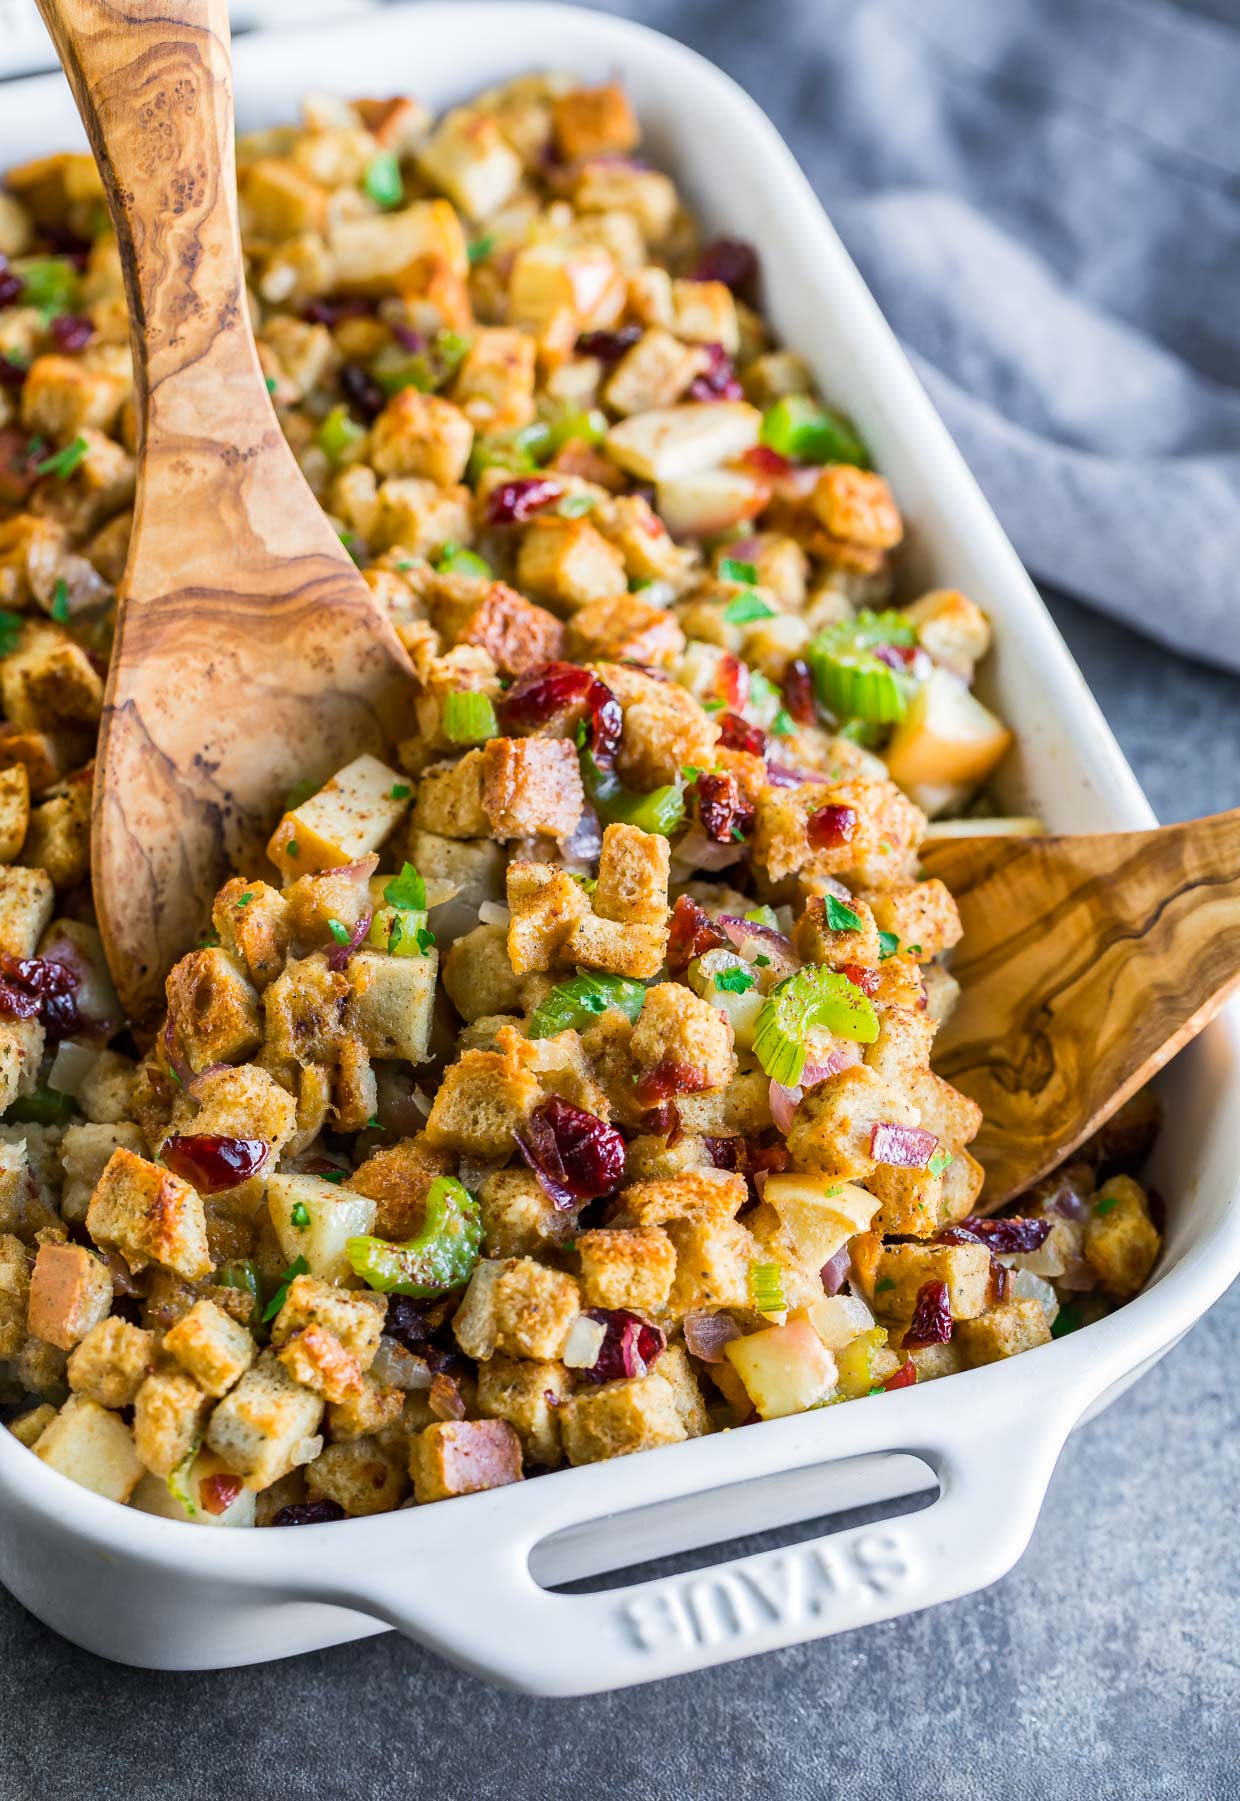 This sweet and savory baked apple cranberry stuffing combines the best of both worlds! Sweet apples and cranberries kissed with cinnamon and baked into a warm Thanksgiving stuffing... it's DELICIOUS.